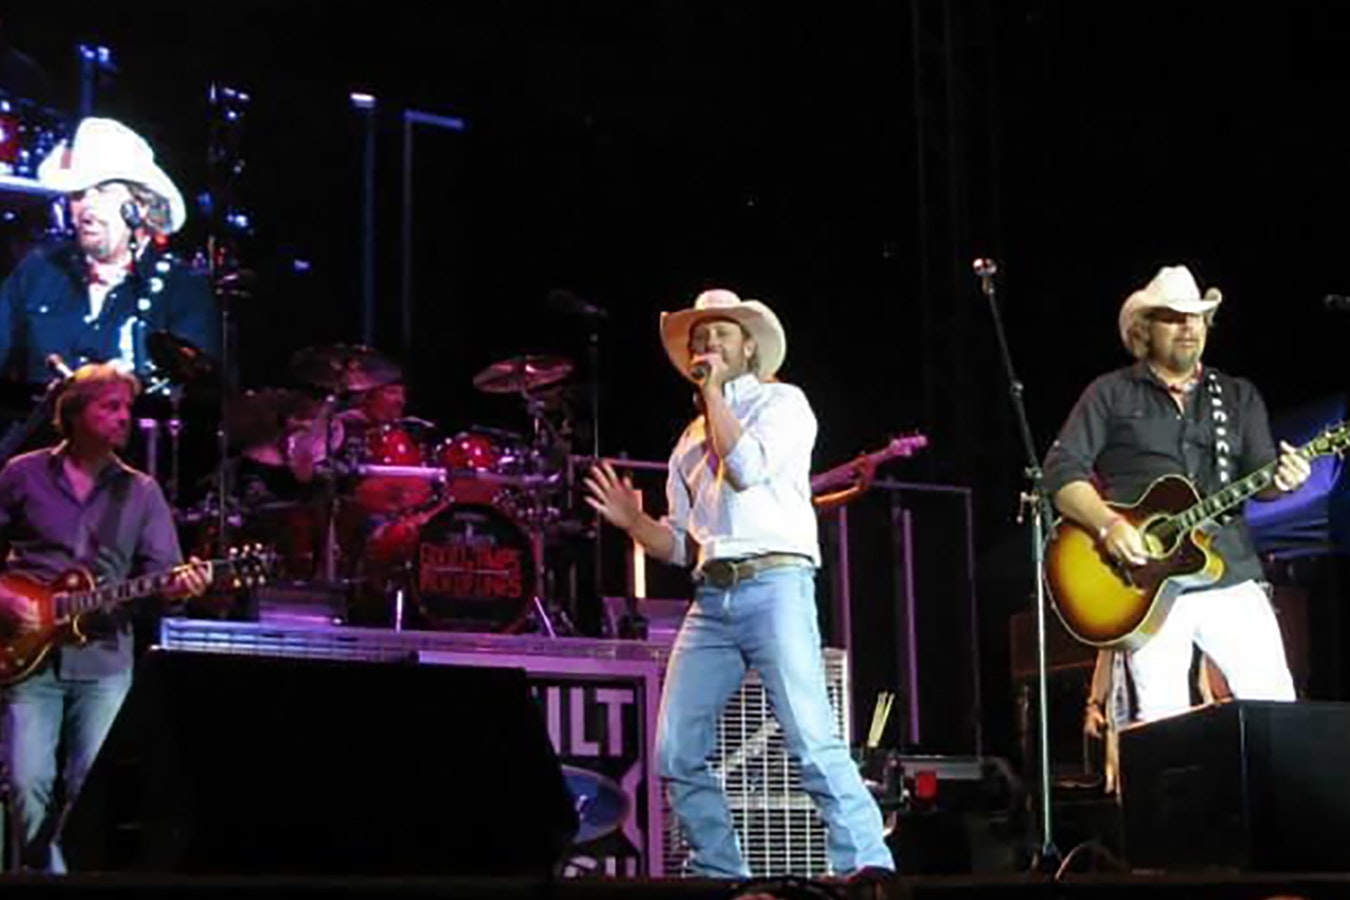 Country music stars Chancey Williams, left, and Toby Keith perform Keith's smash hit "Should've Been a Cowboy" at Cheyenne Frontier Days.